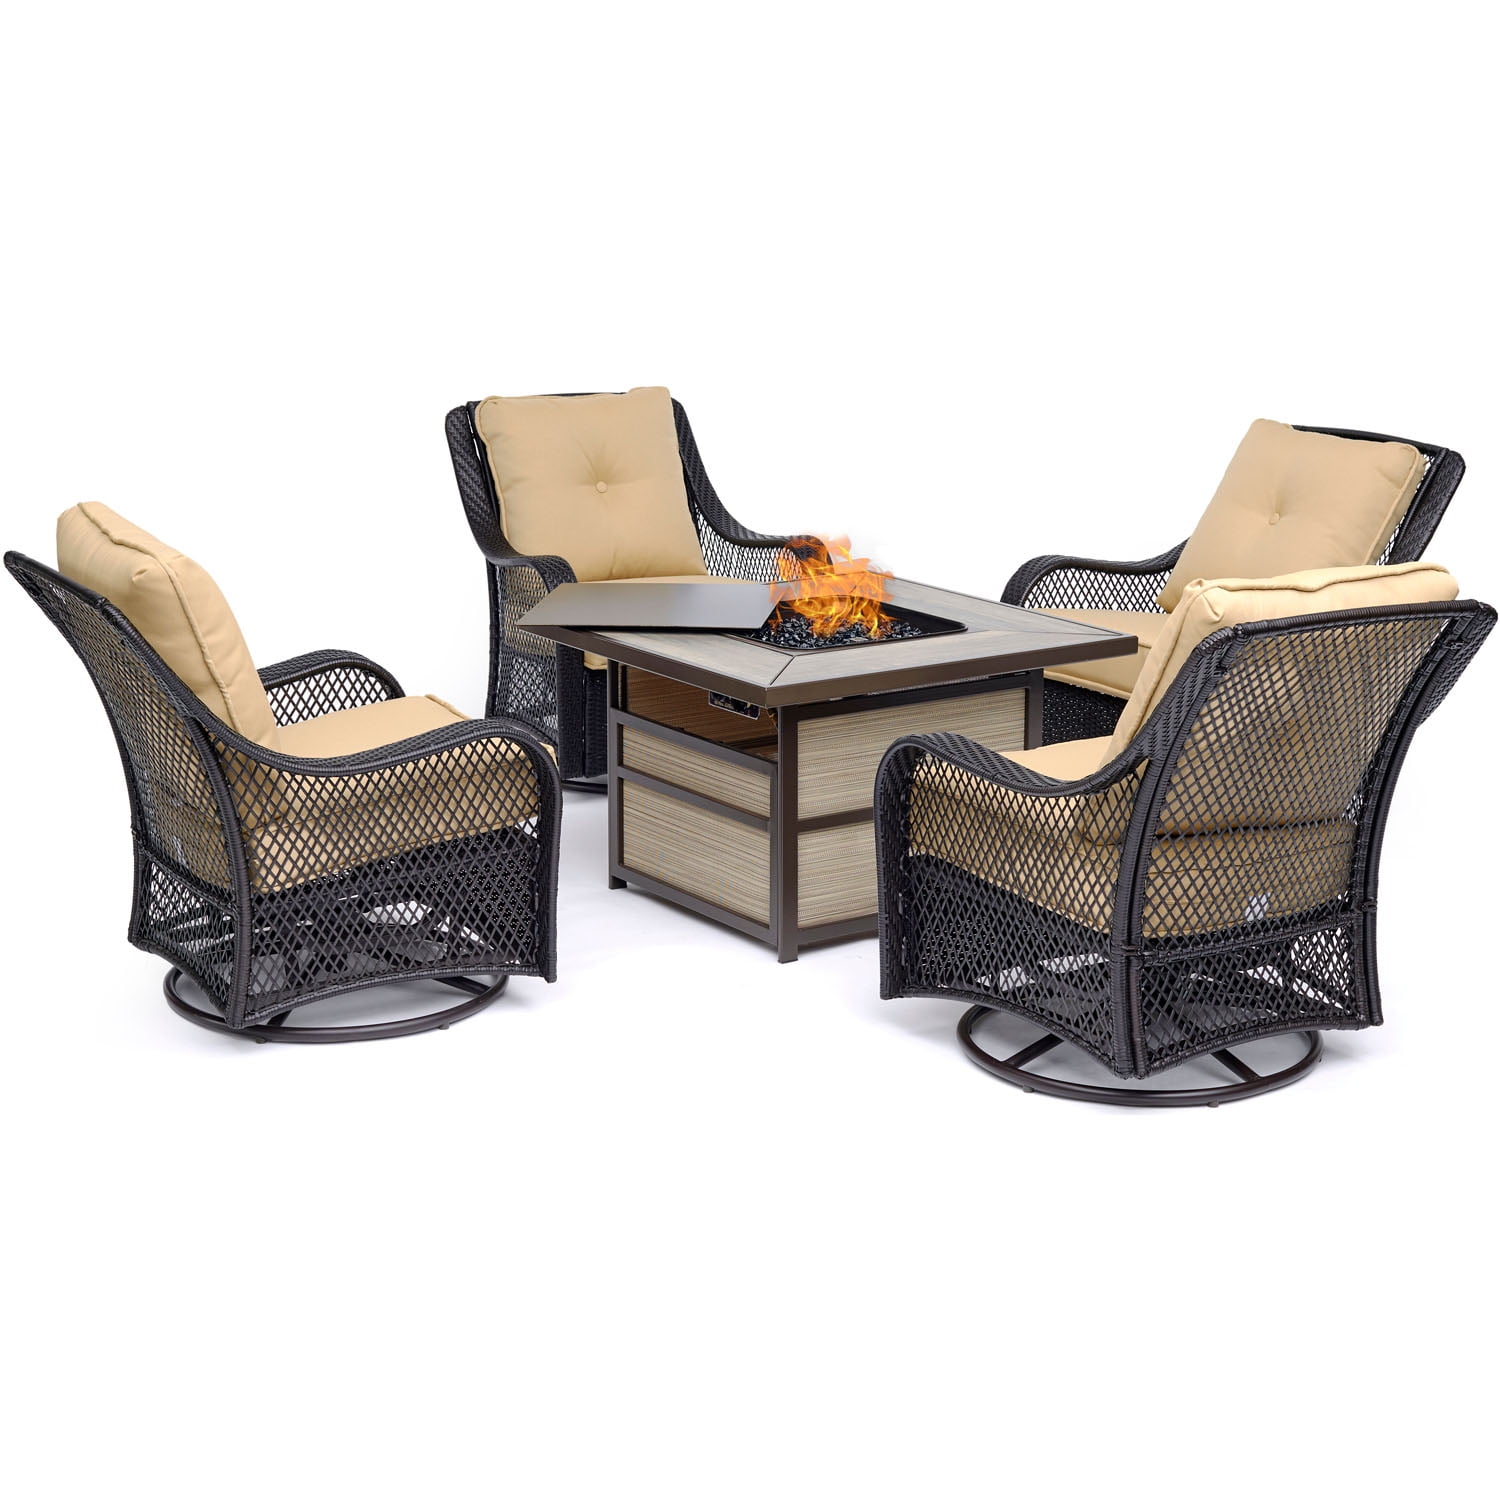 Hanover Orleans 5-Piece Fire Pit Chat Set with a 40,000 BTU Fire Pit Table and 4 Woven Swivel Gliders in Sahara Sand - image 1 of 7